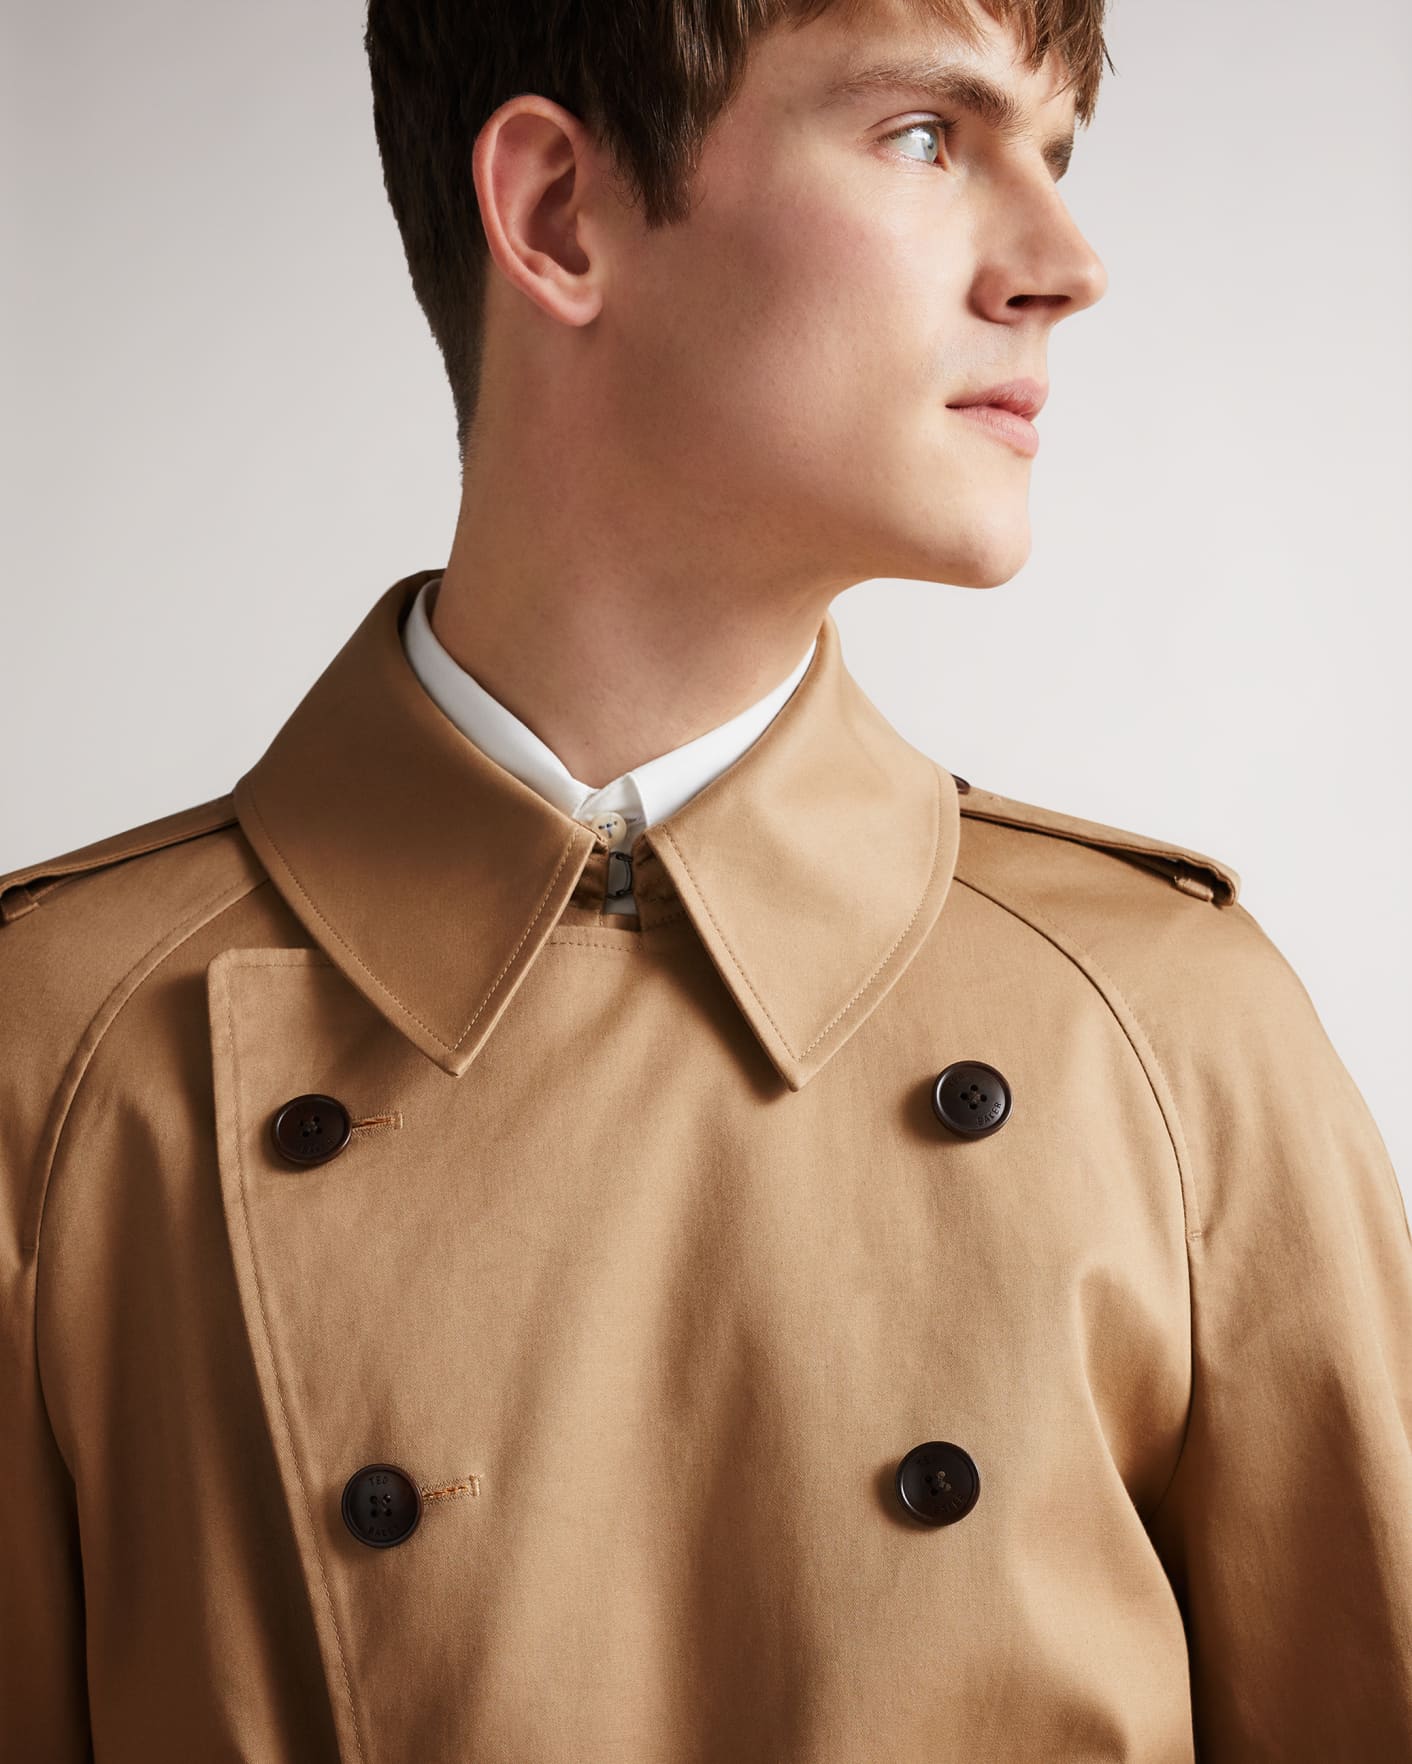 Tan Bonded Trench Coat Ted Baker